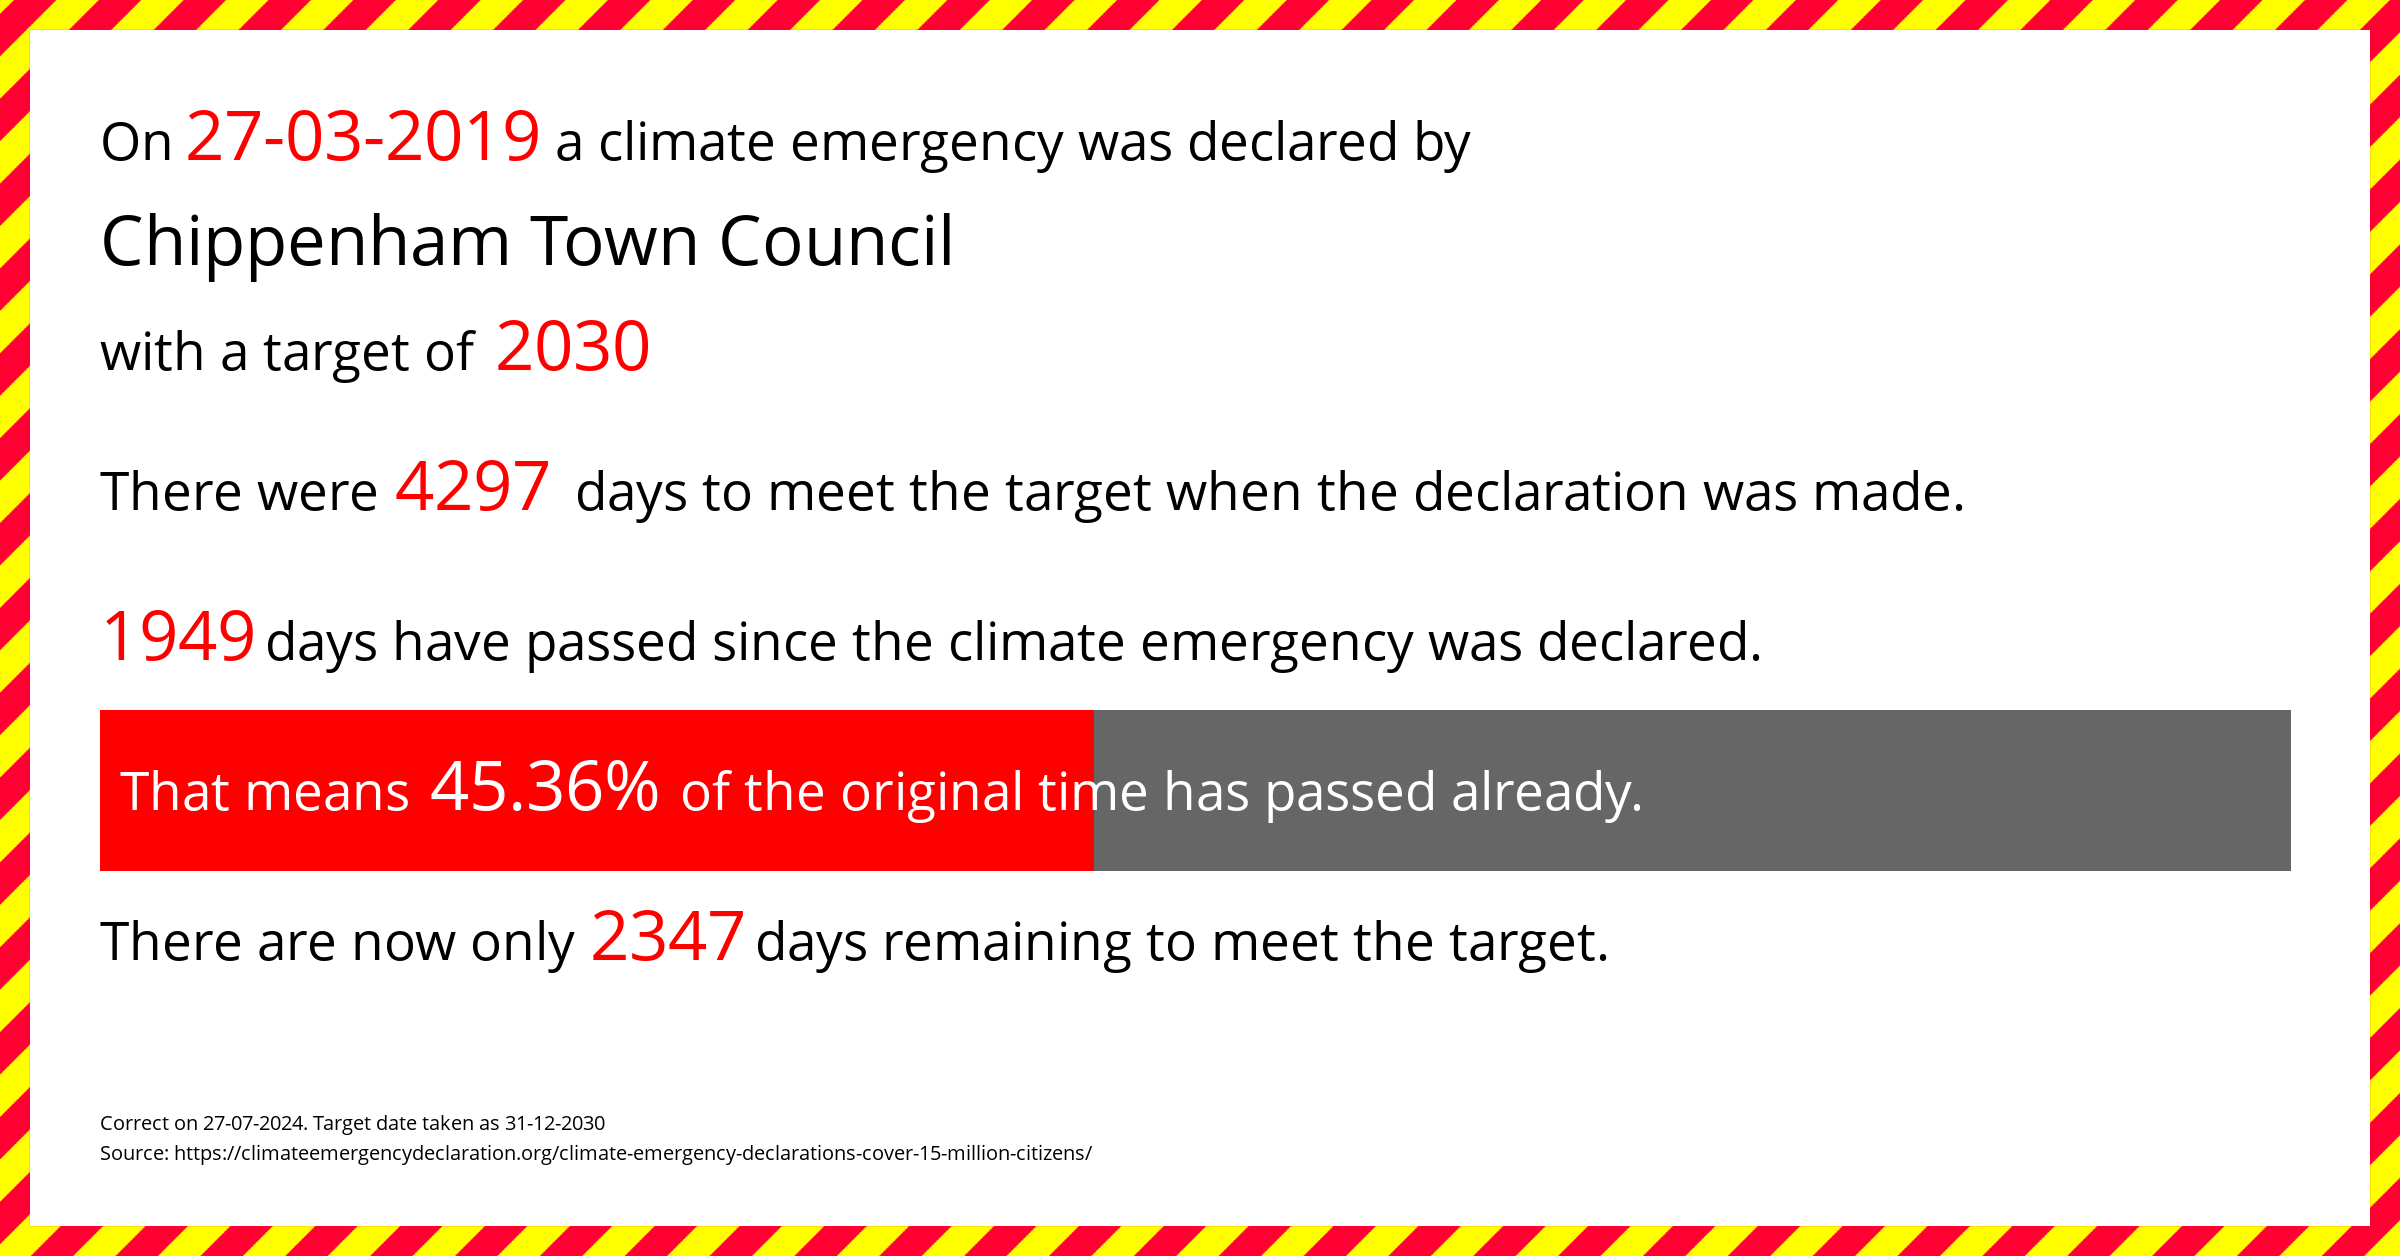 Chippenham Town Council declared a Climate emergency on Wednesday 27th March 2019, with a target of 2030.